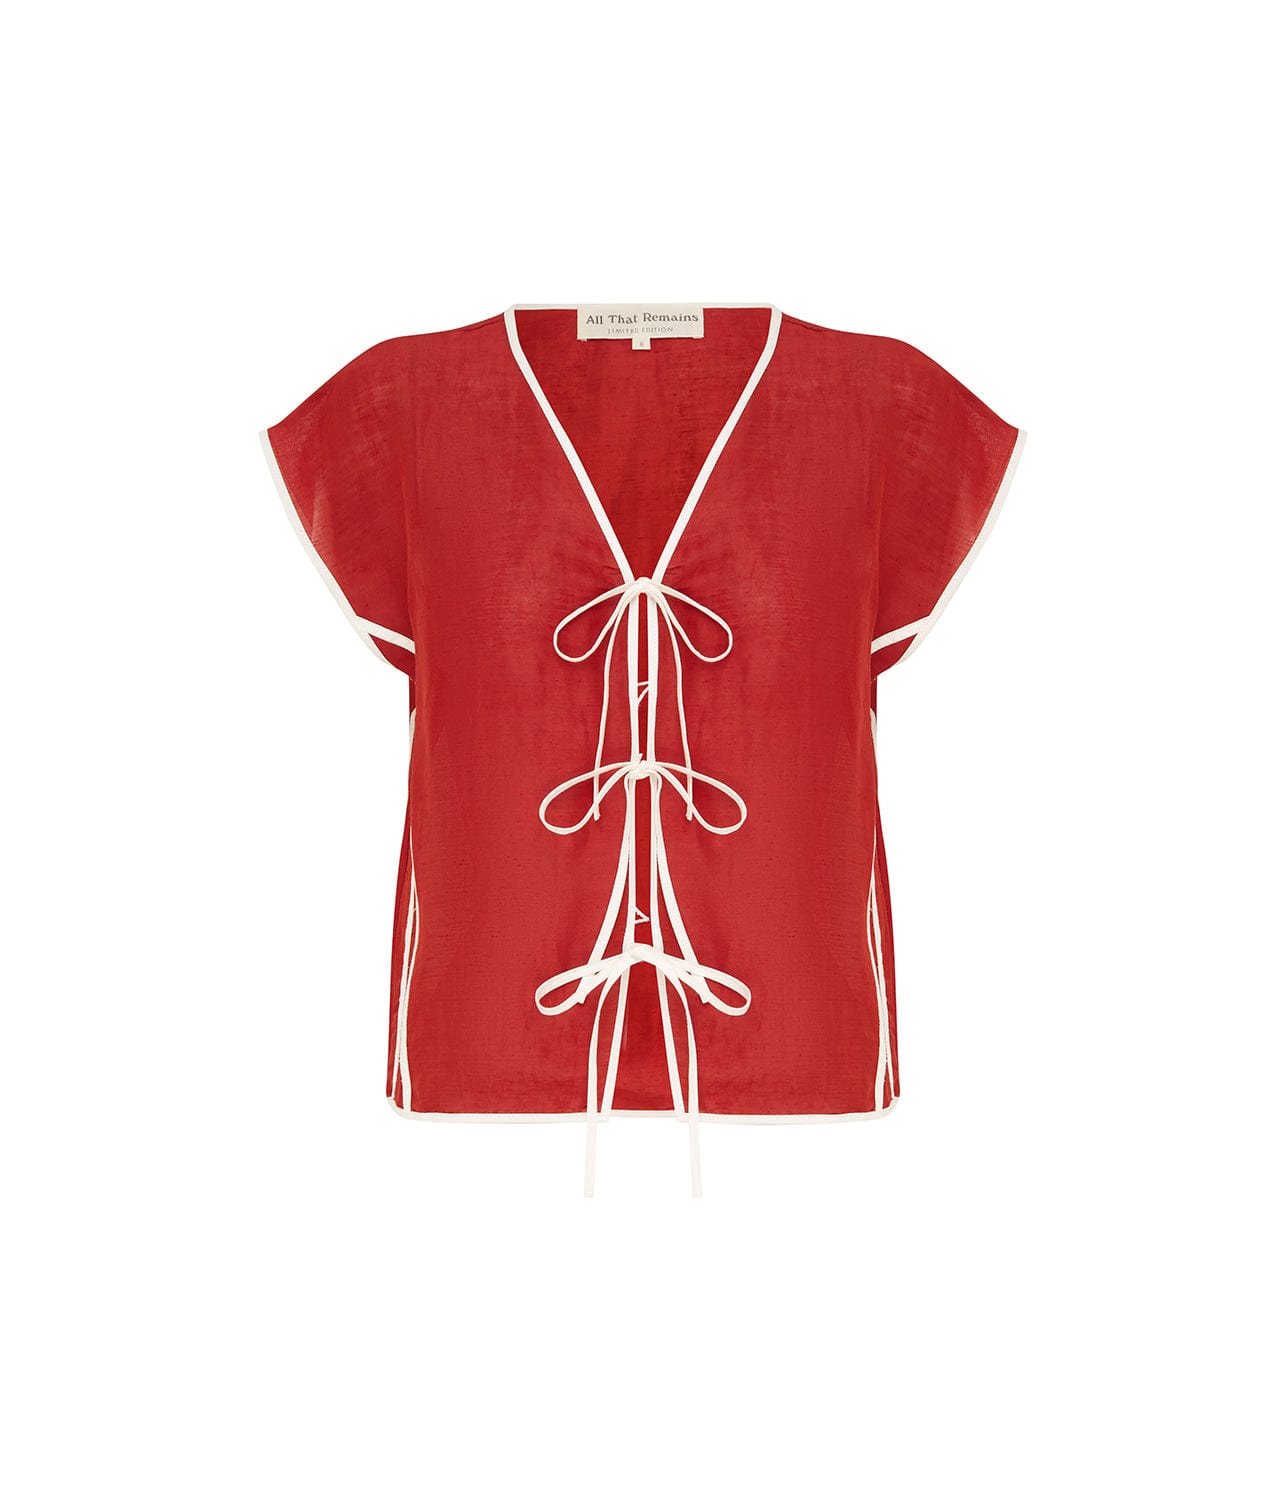 ANA TOP- RED & CREAM | ALL THAT REMAINS |  ALL THAT REMAINS ANA TOP- RED & CREAM